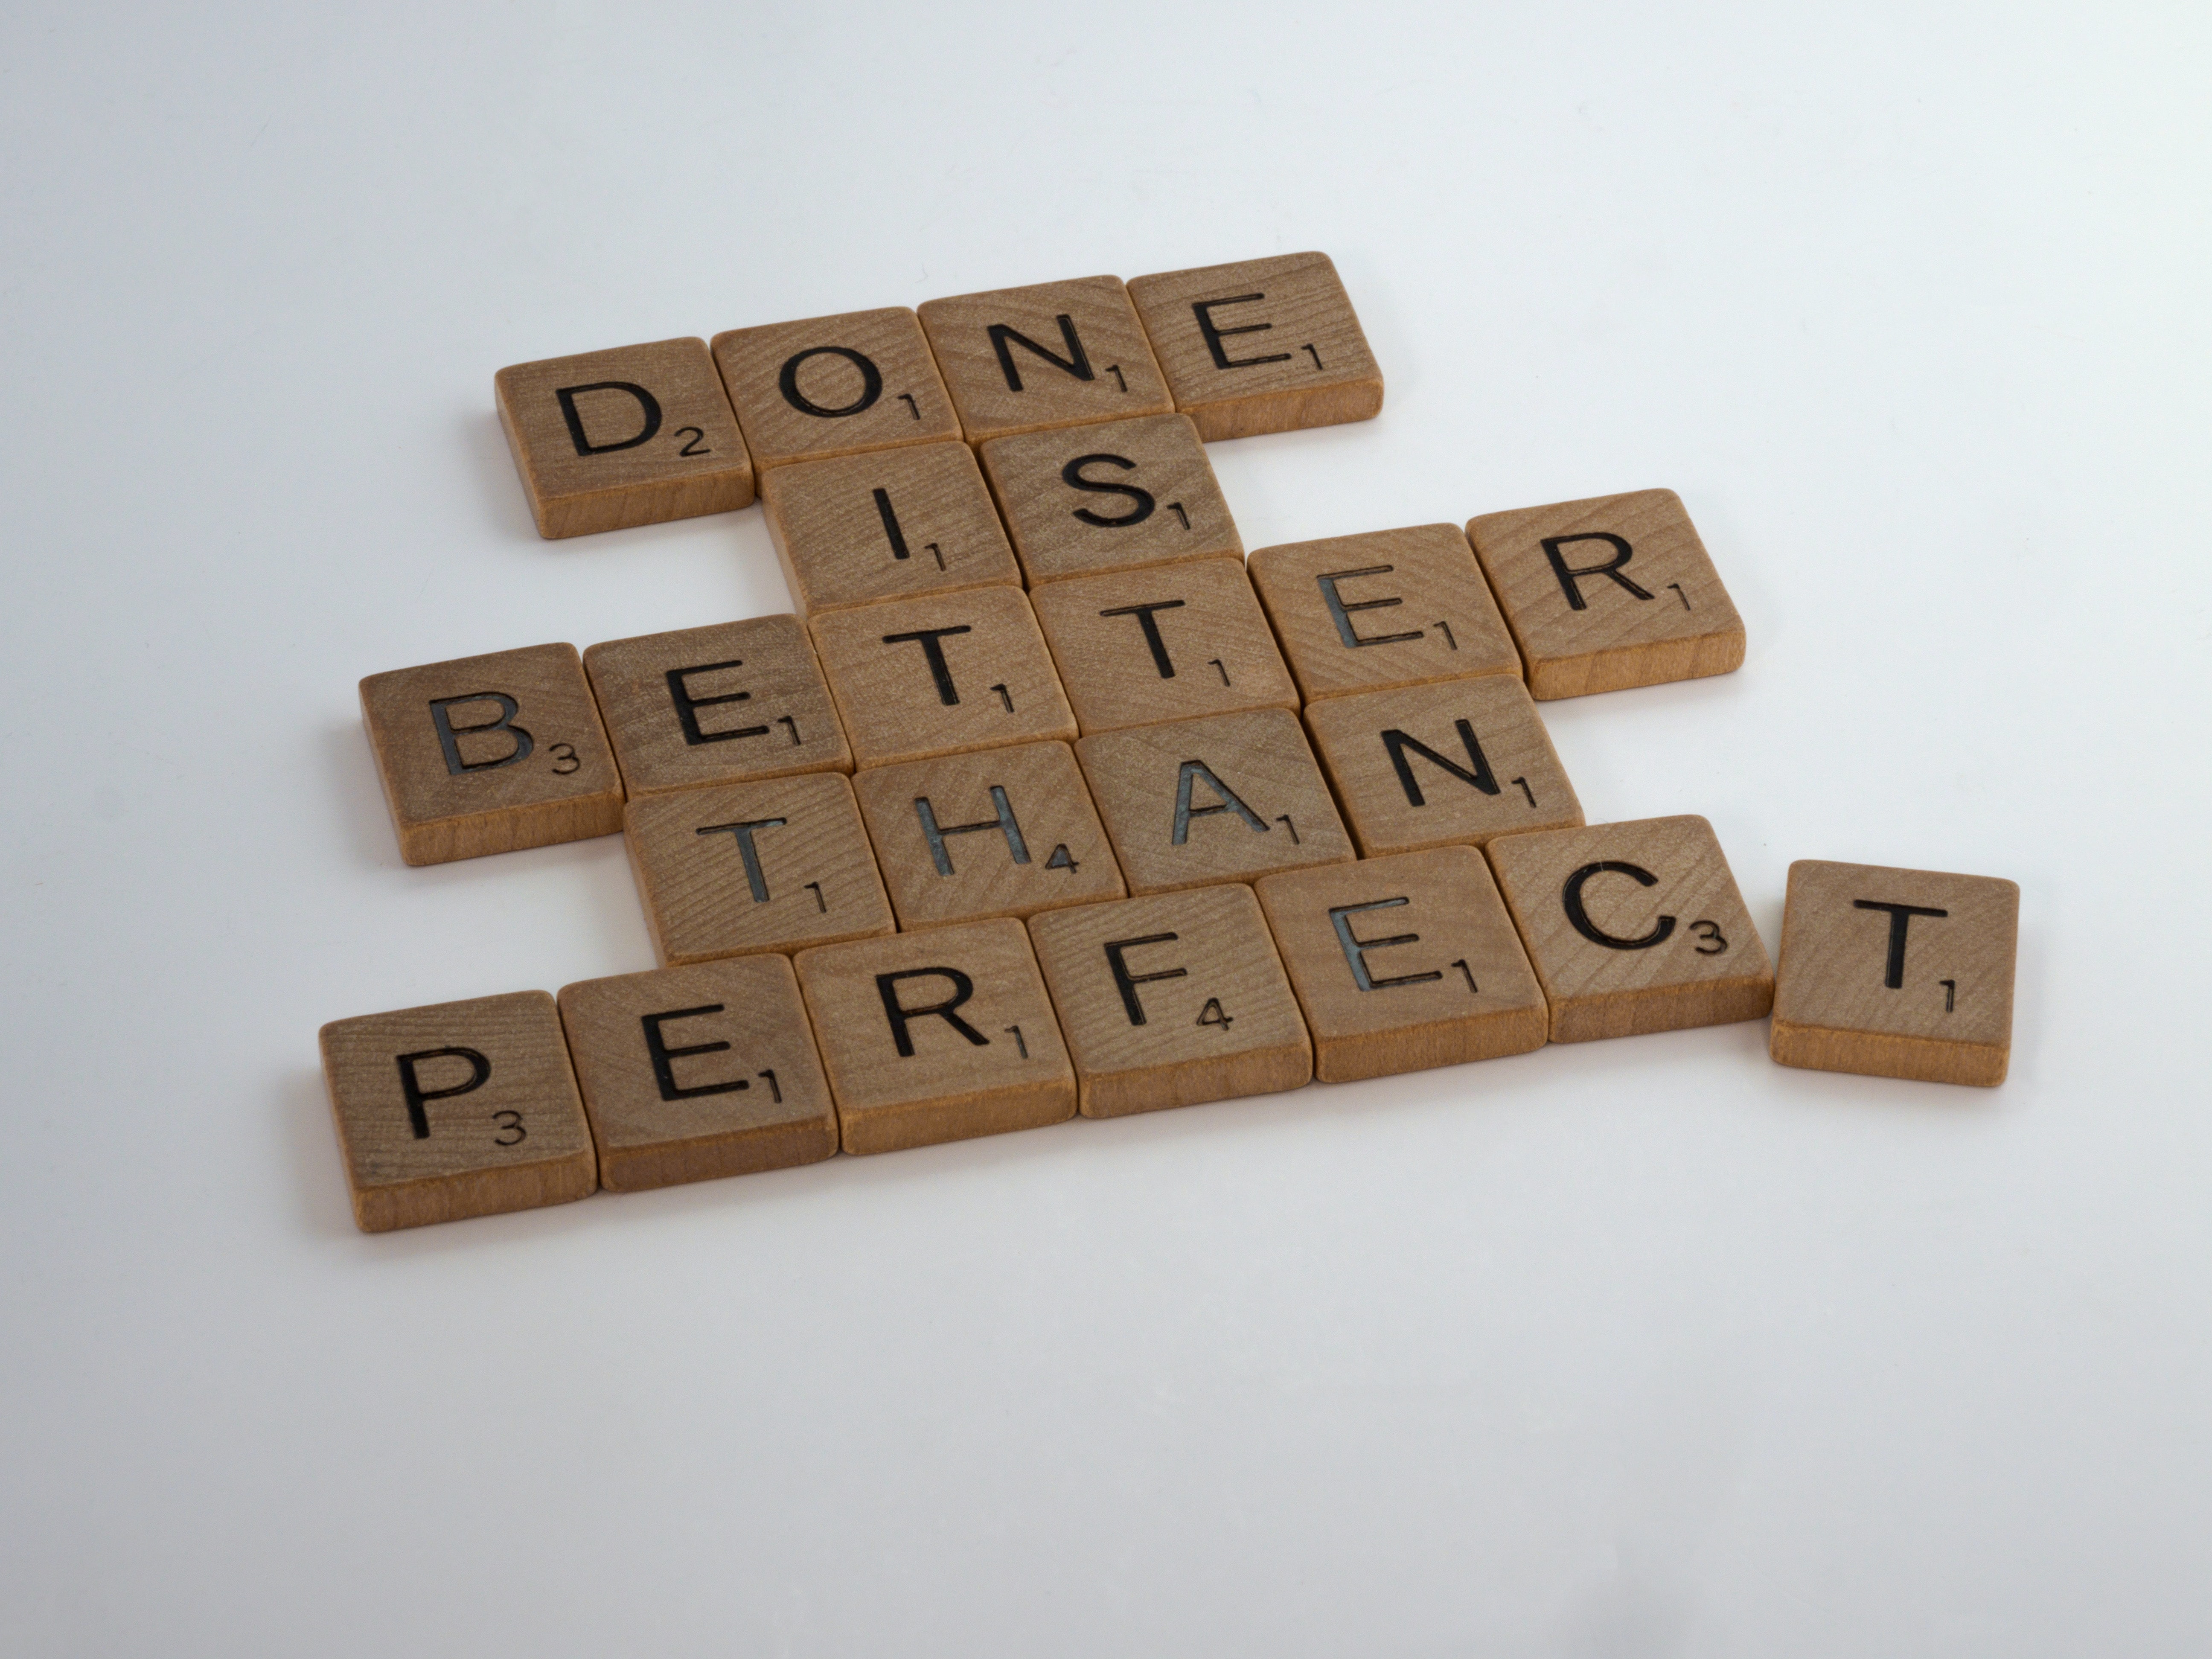 scrabble pieces spelling out &quot;done is better than perfect&quot;